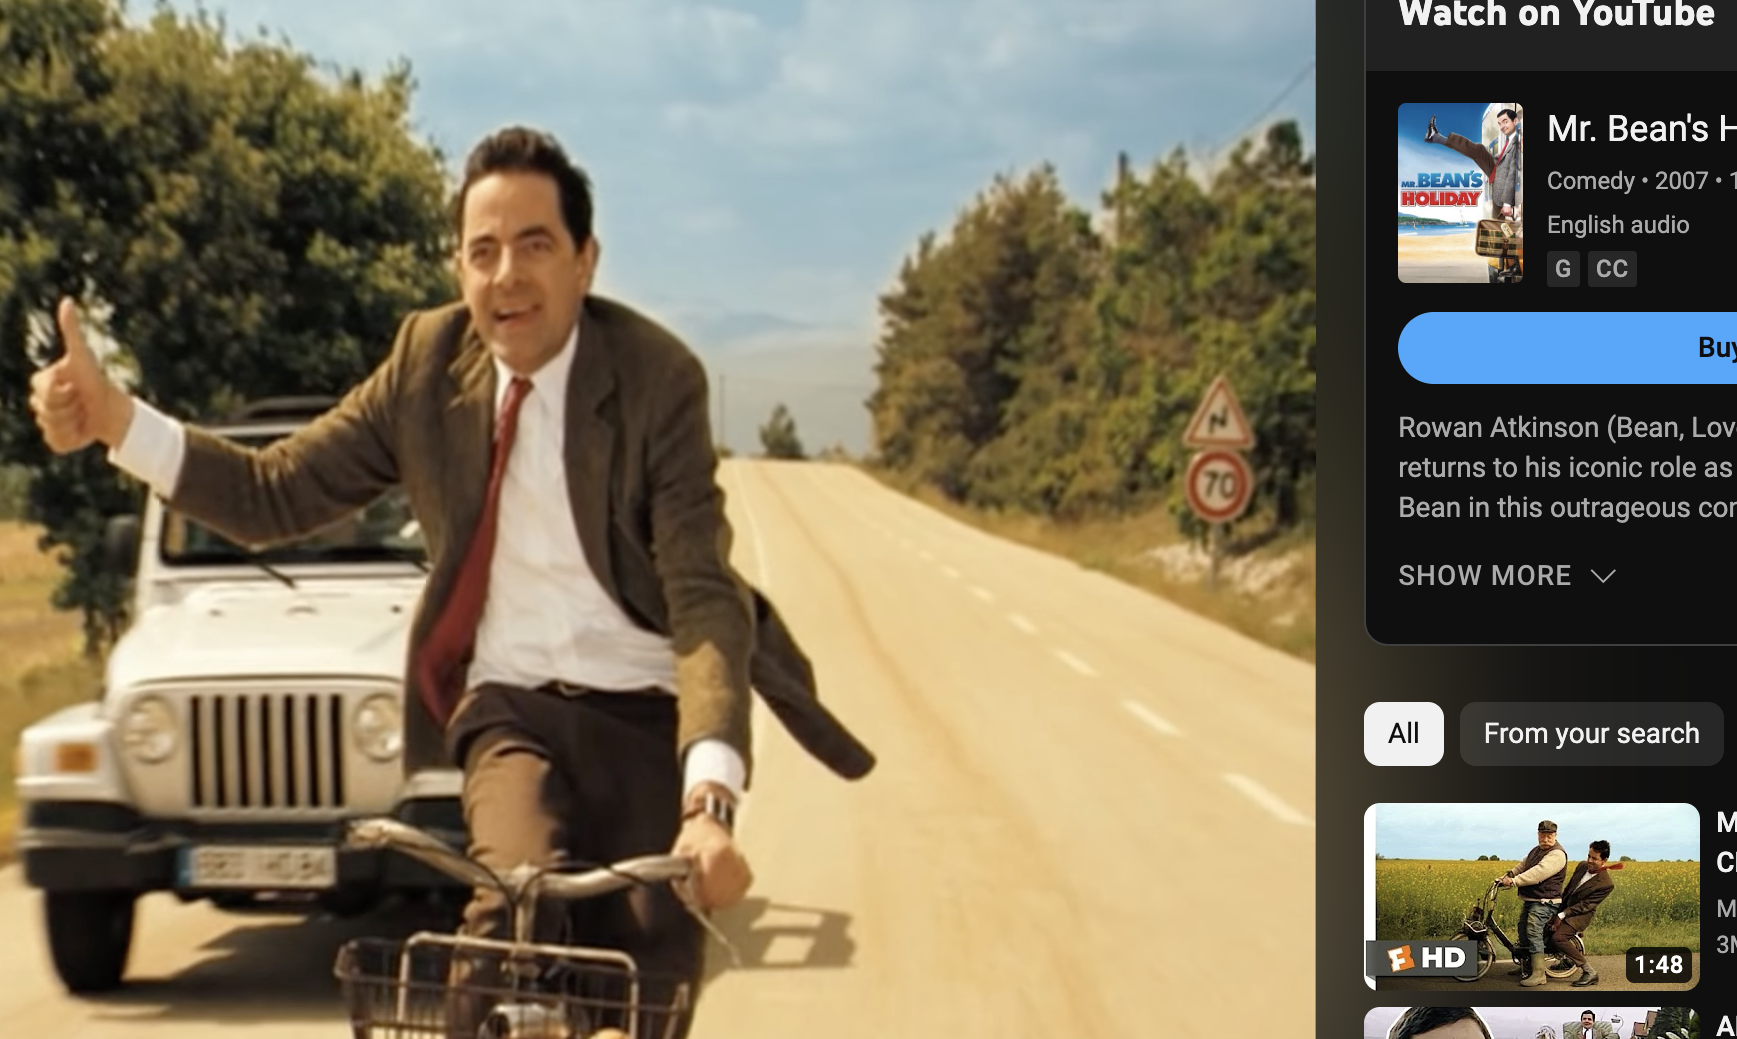 Rowan Atkinson as Mr. Bean from &quot;Mr. Bean&#x27;s Holiday&quot; is riding a bicycle down the road